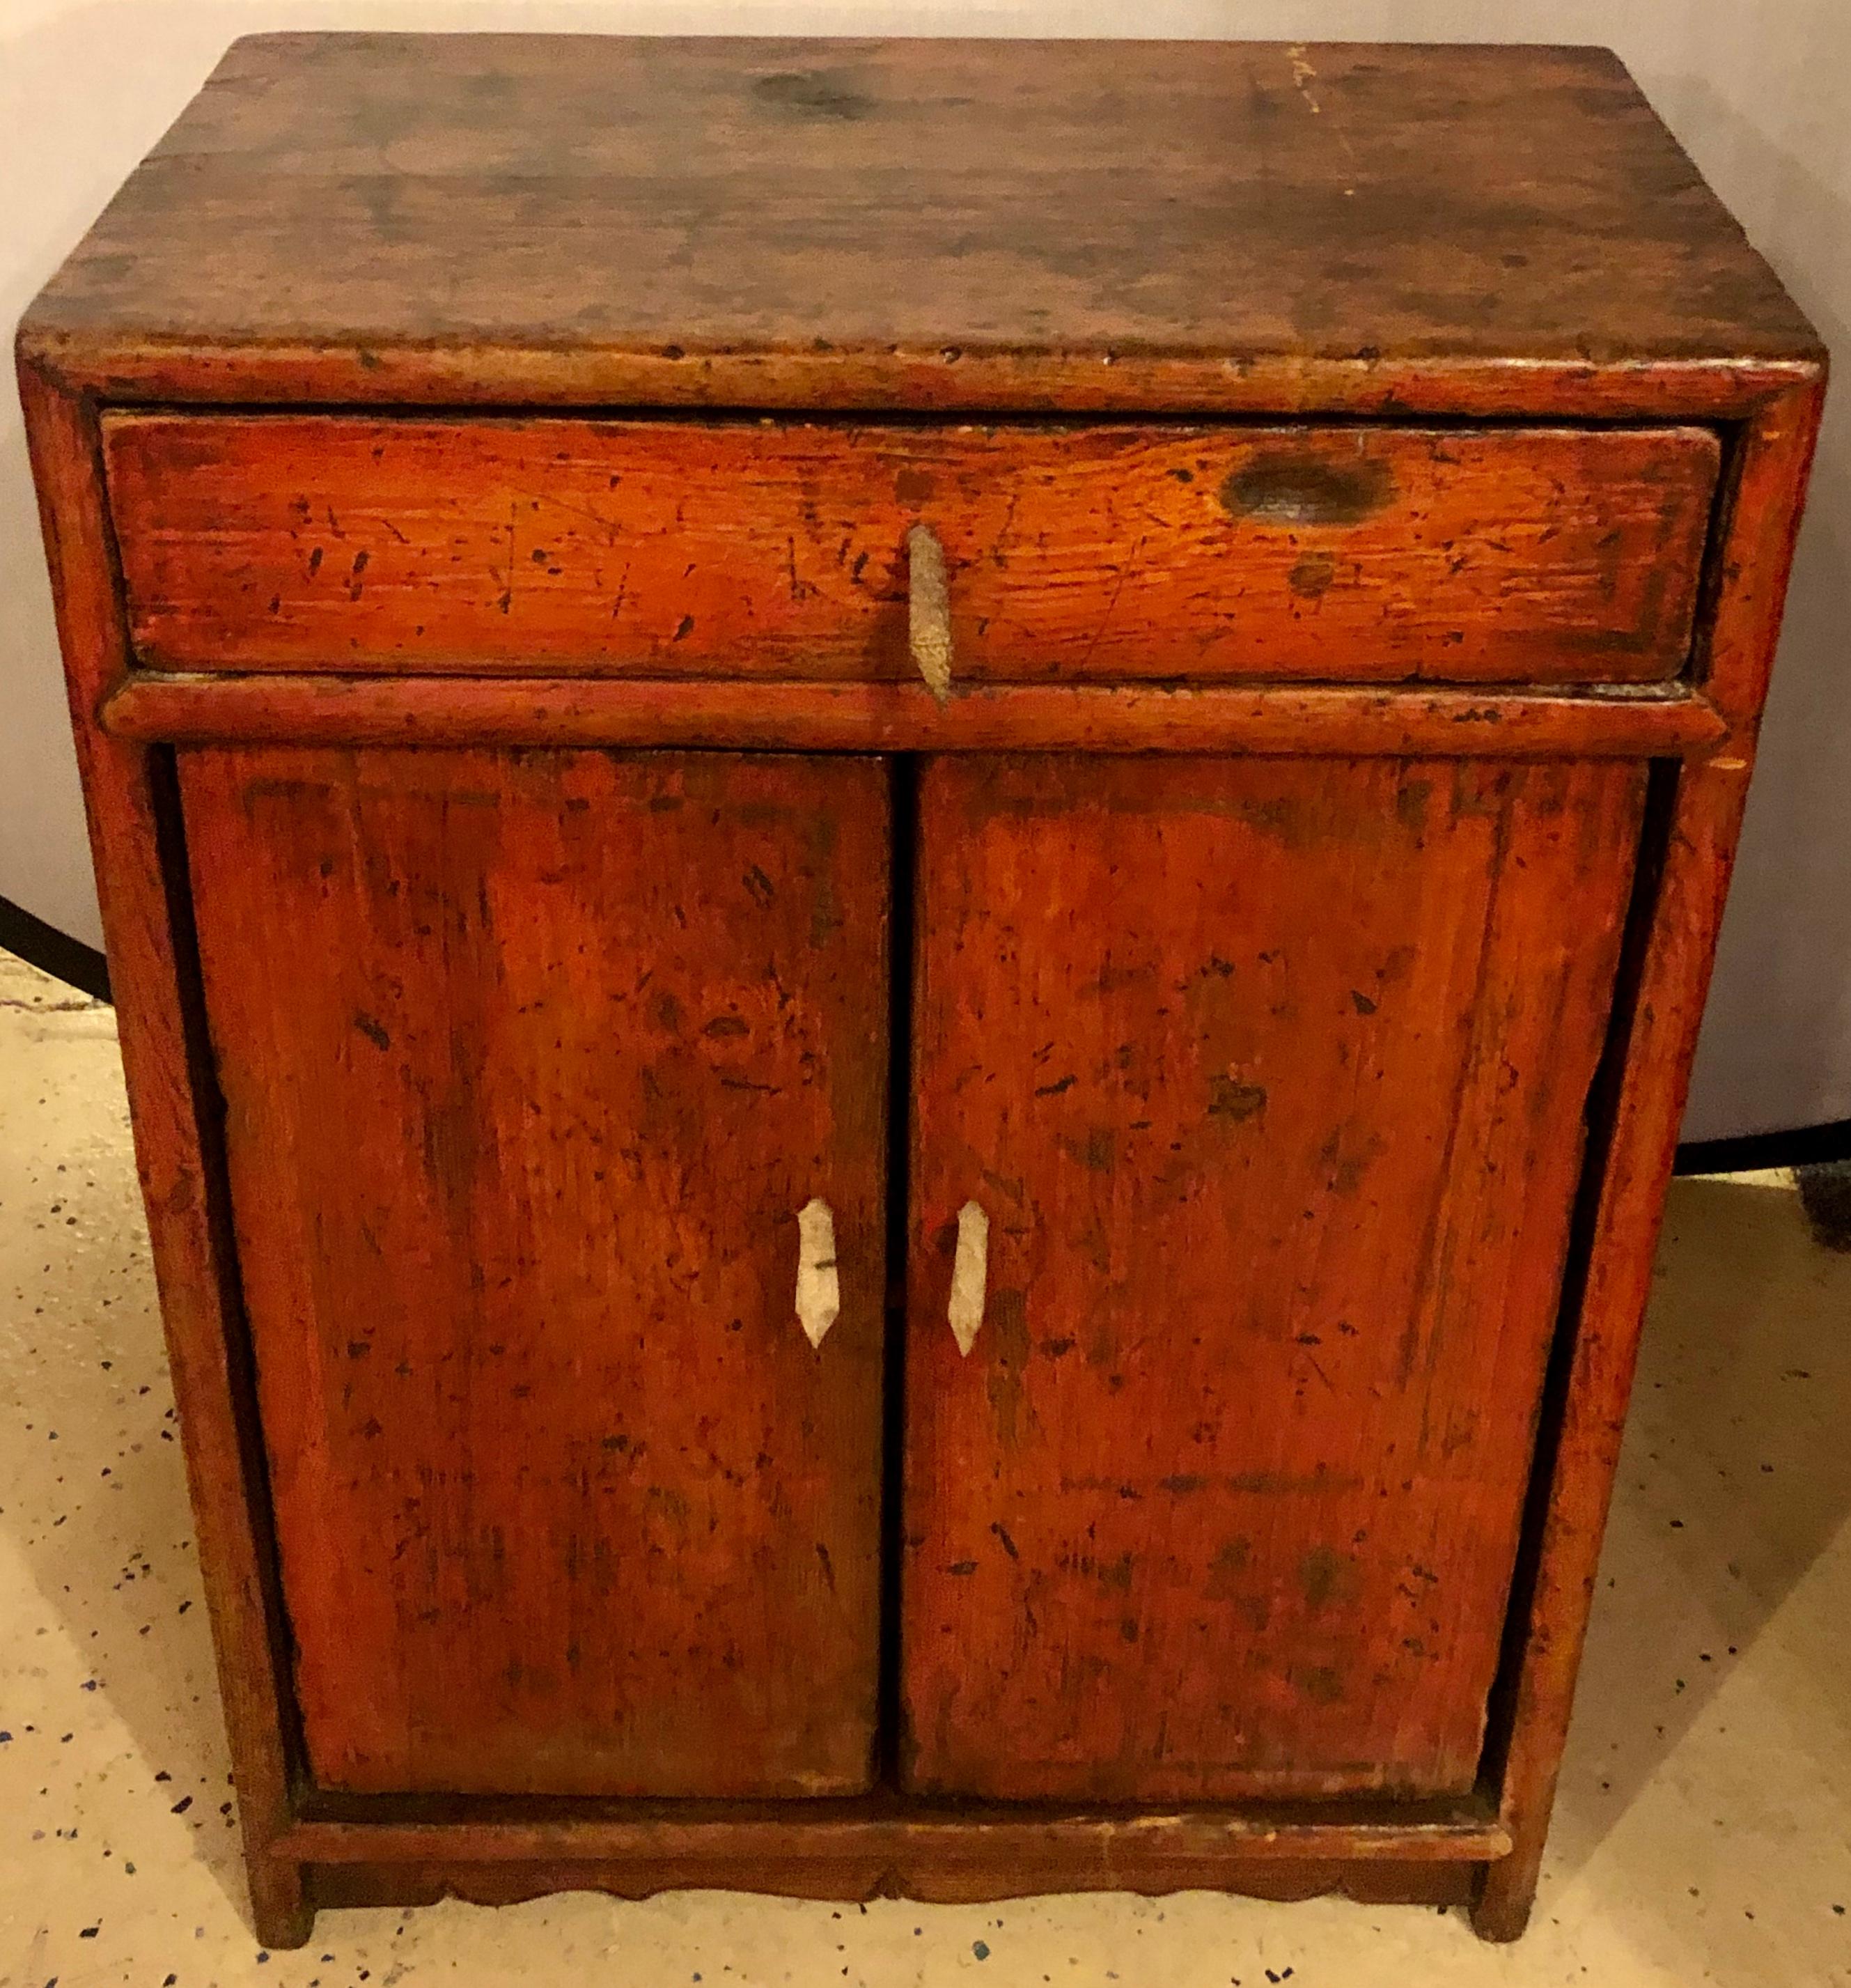 20th Century Small Antique Rustic Cabinet / End or Side Table Having a Single Leather Pulls